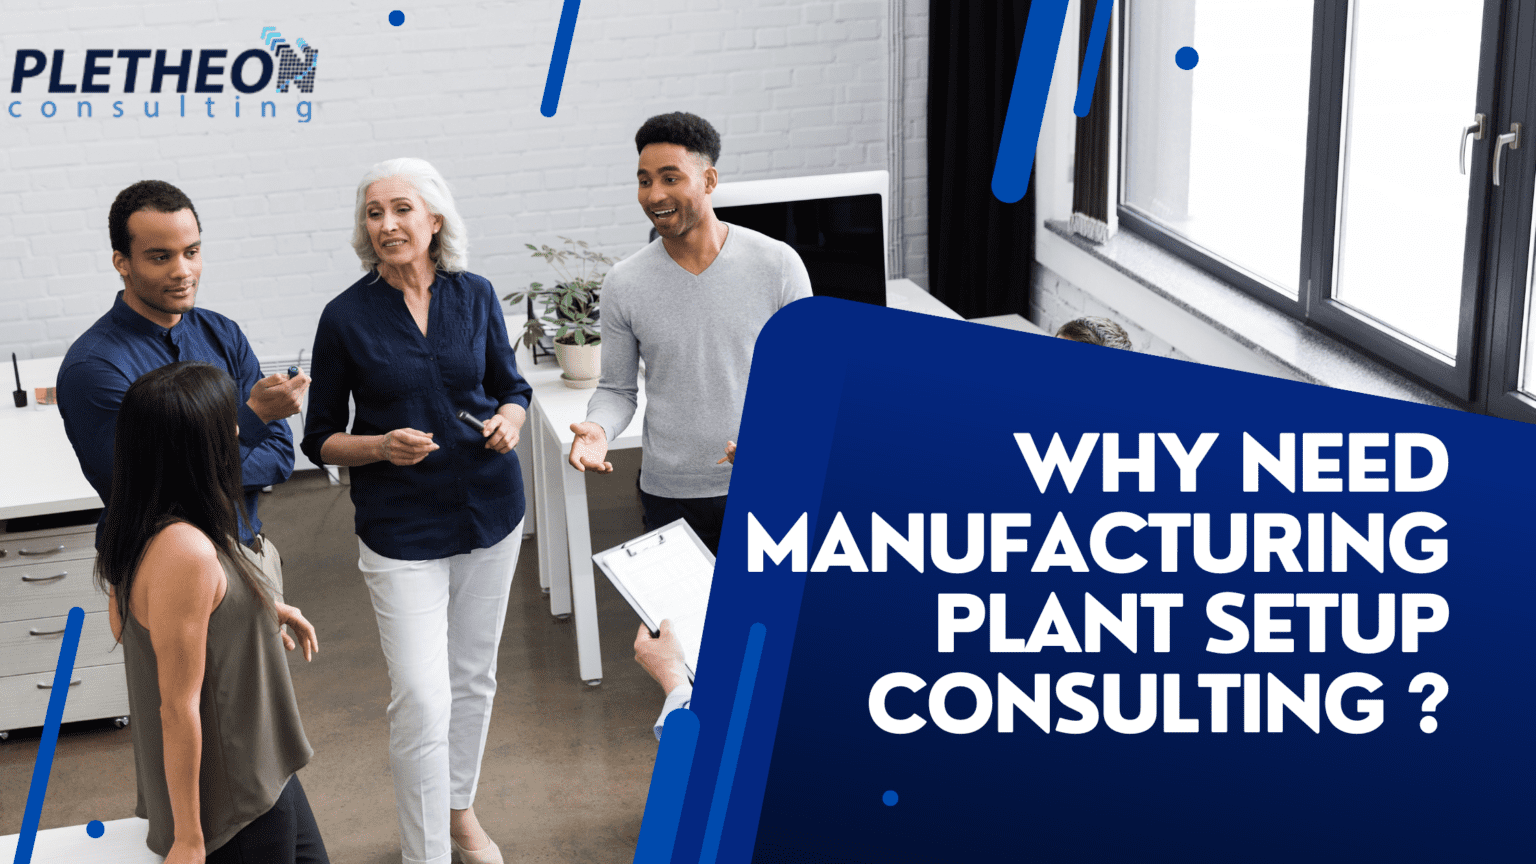 Why Need Manufacturing Plant Setup Consulting Why Need Manufacturing Plant Setup Consulting ?